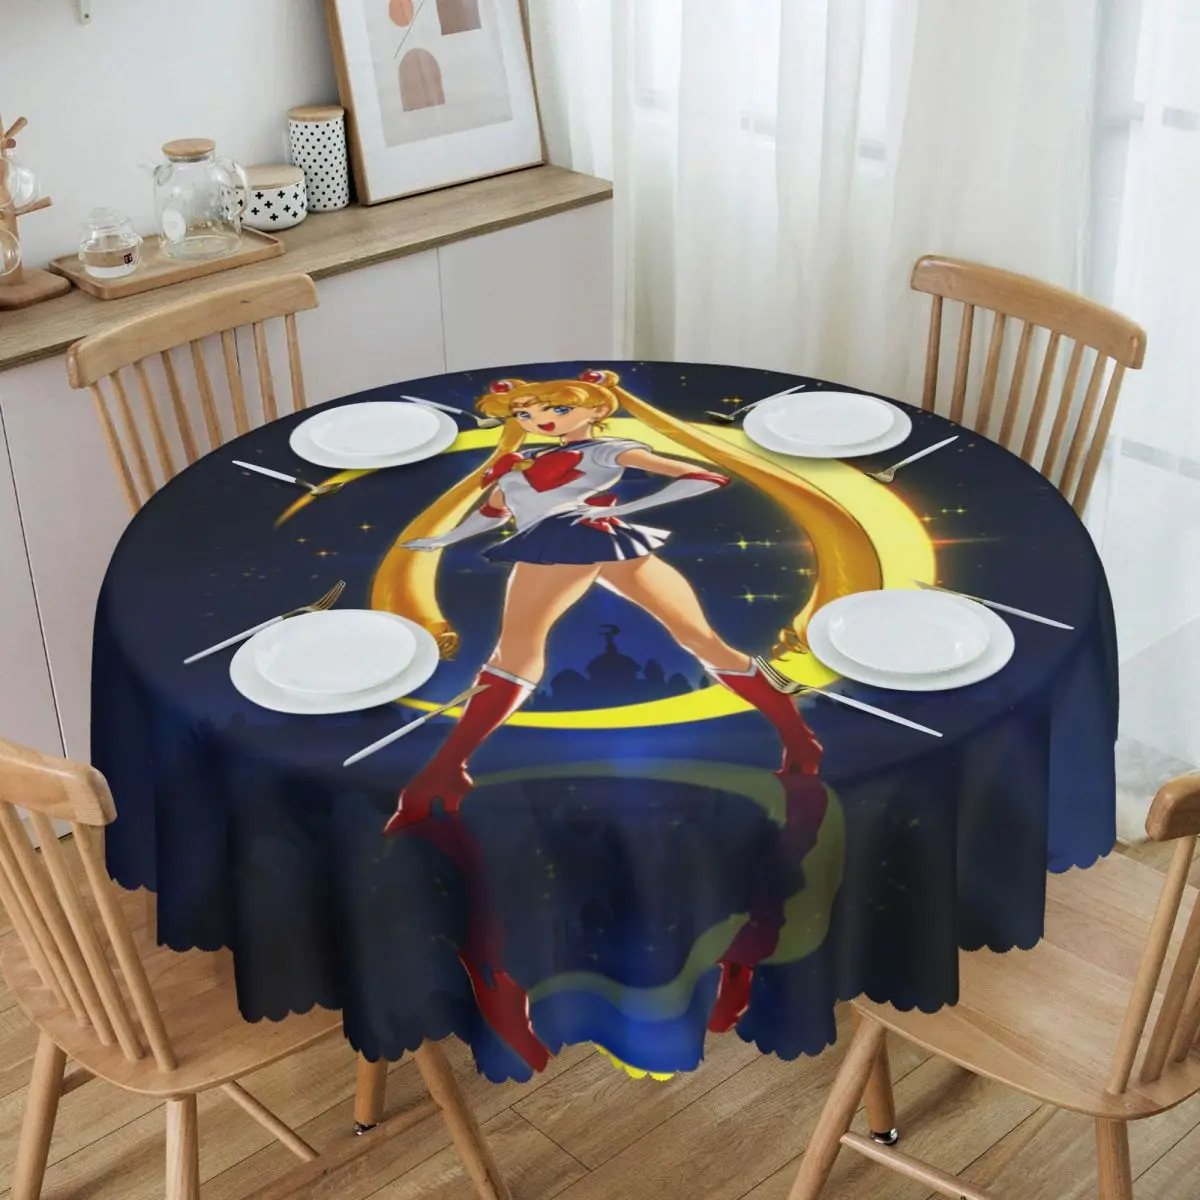 

Round Oilproof Japanese Shojo Manga Sailor Table Cover Anime Moon Girl Tablecloth for Picnic 60 inches Table Cloth